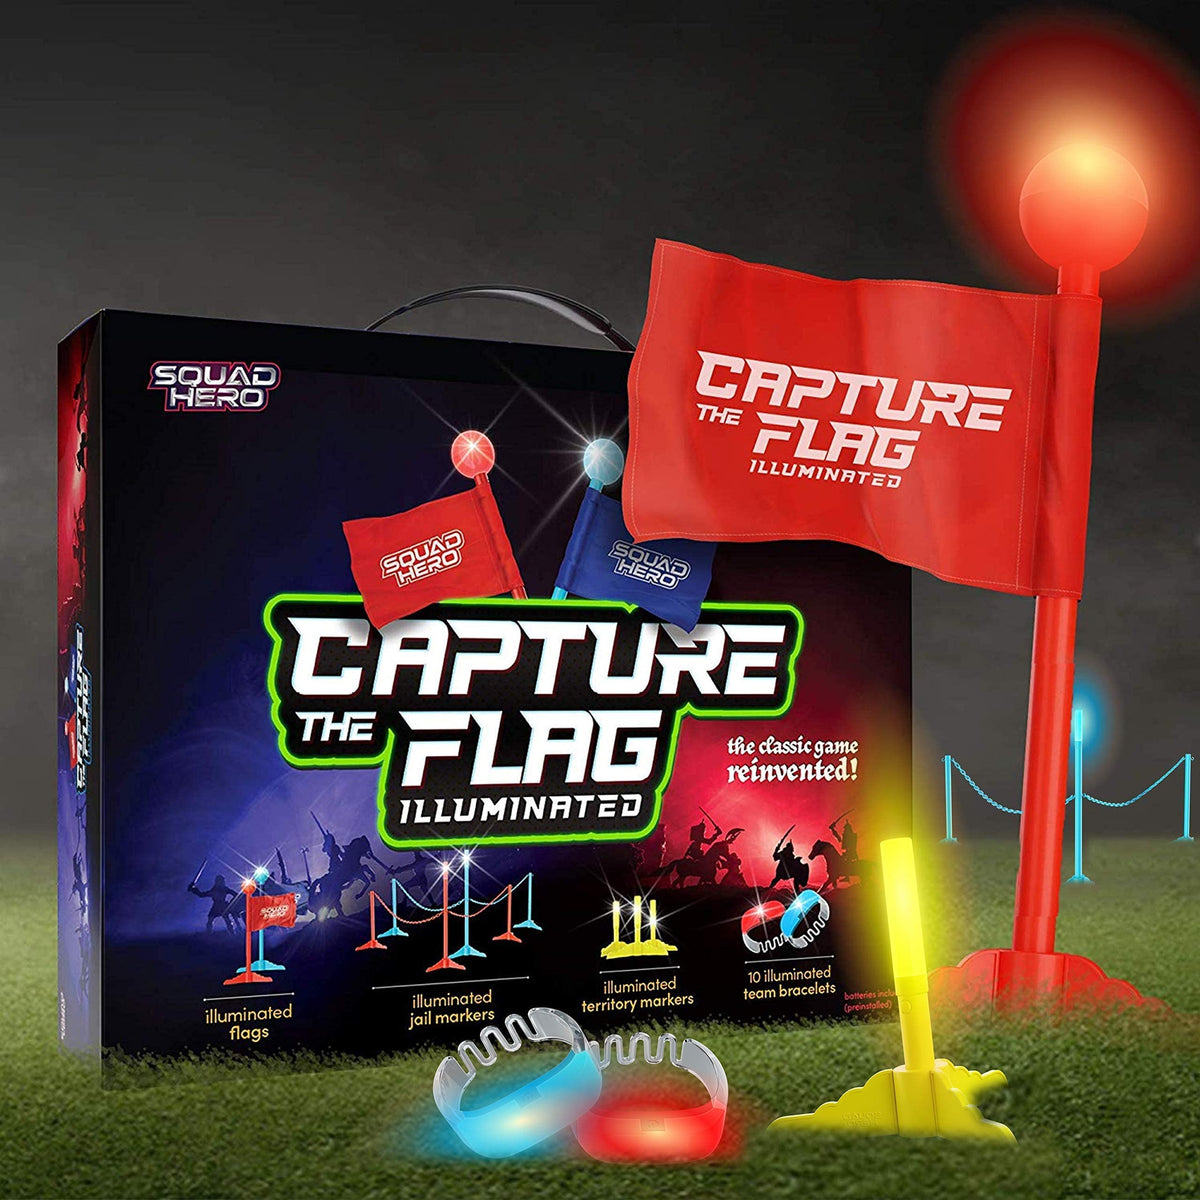 Capture The Flag Game Illuminated - Outdoor Activity for Teen Boys and  Girls Parties- Fun Sports Gift Idea for Kids & Adults of All Ages - Cool  for